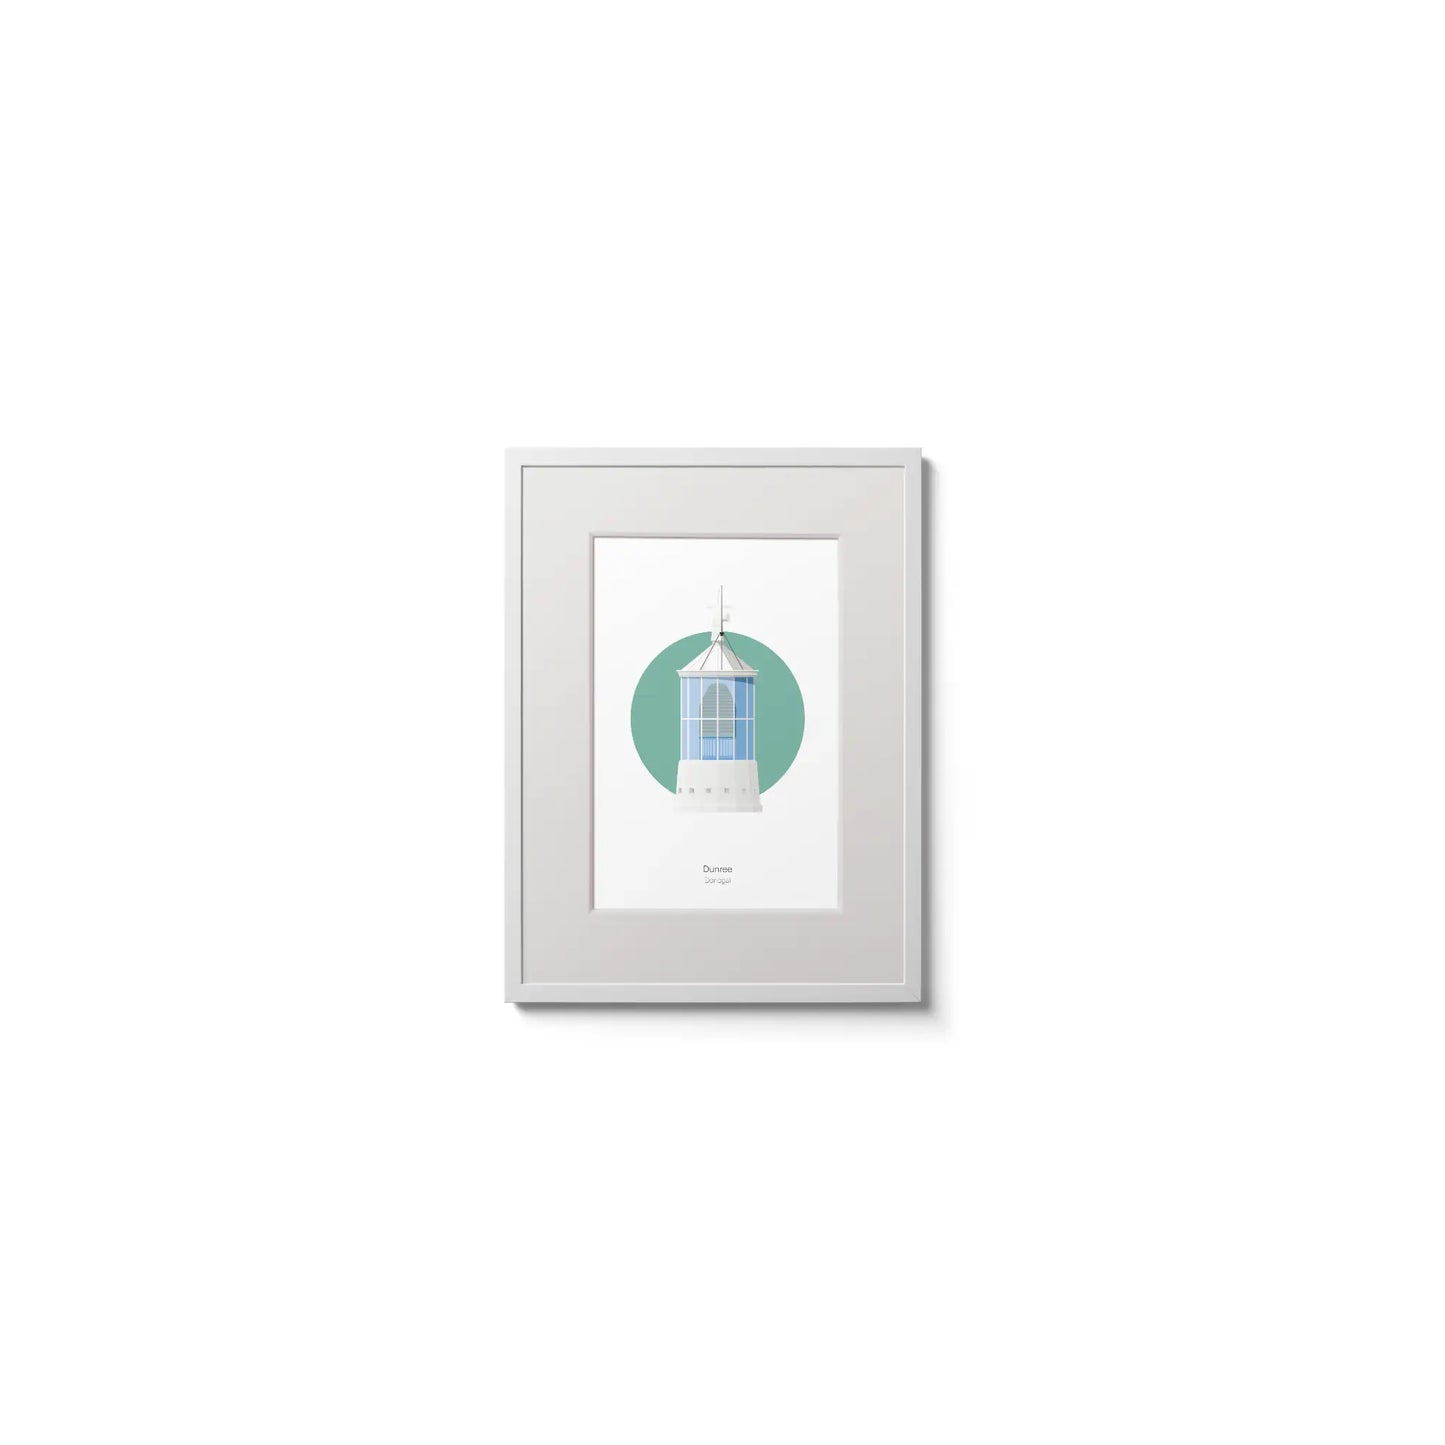 Contemporary wall hanging of Dunree lighthouse on a white background inside light blue square,  in a white frame measuring 15x20cm.